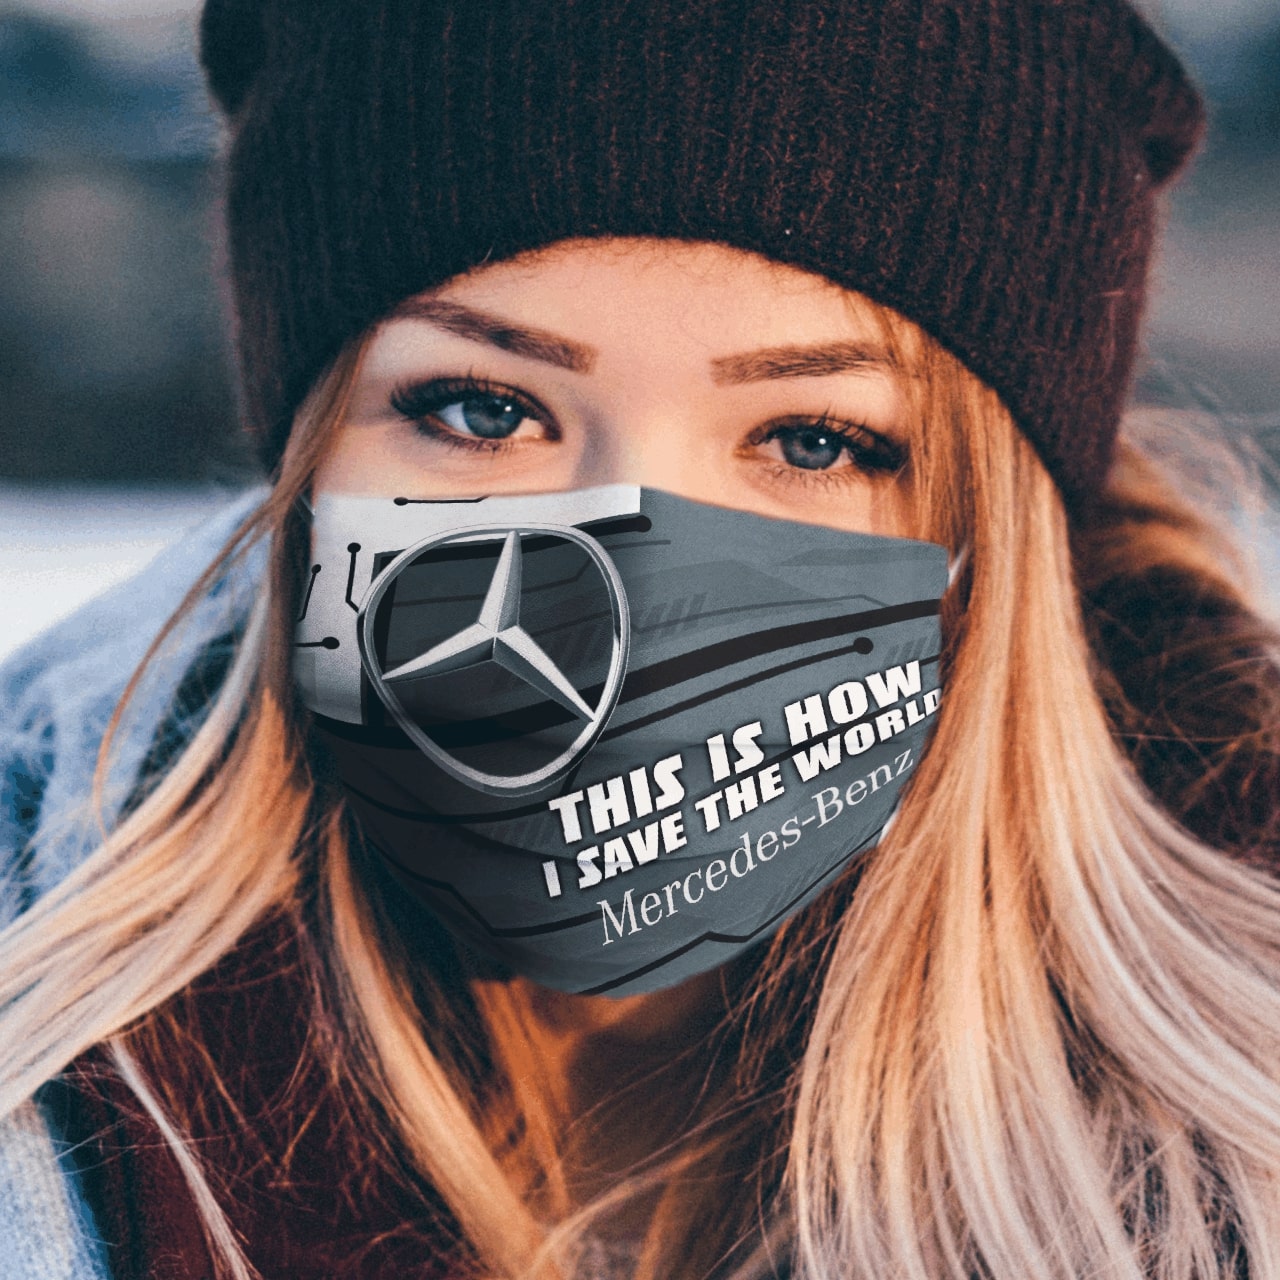 This is how i save the world mercedes-benz full printing face mask 1